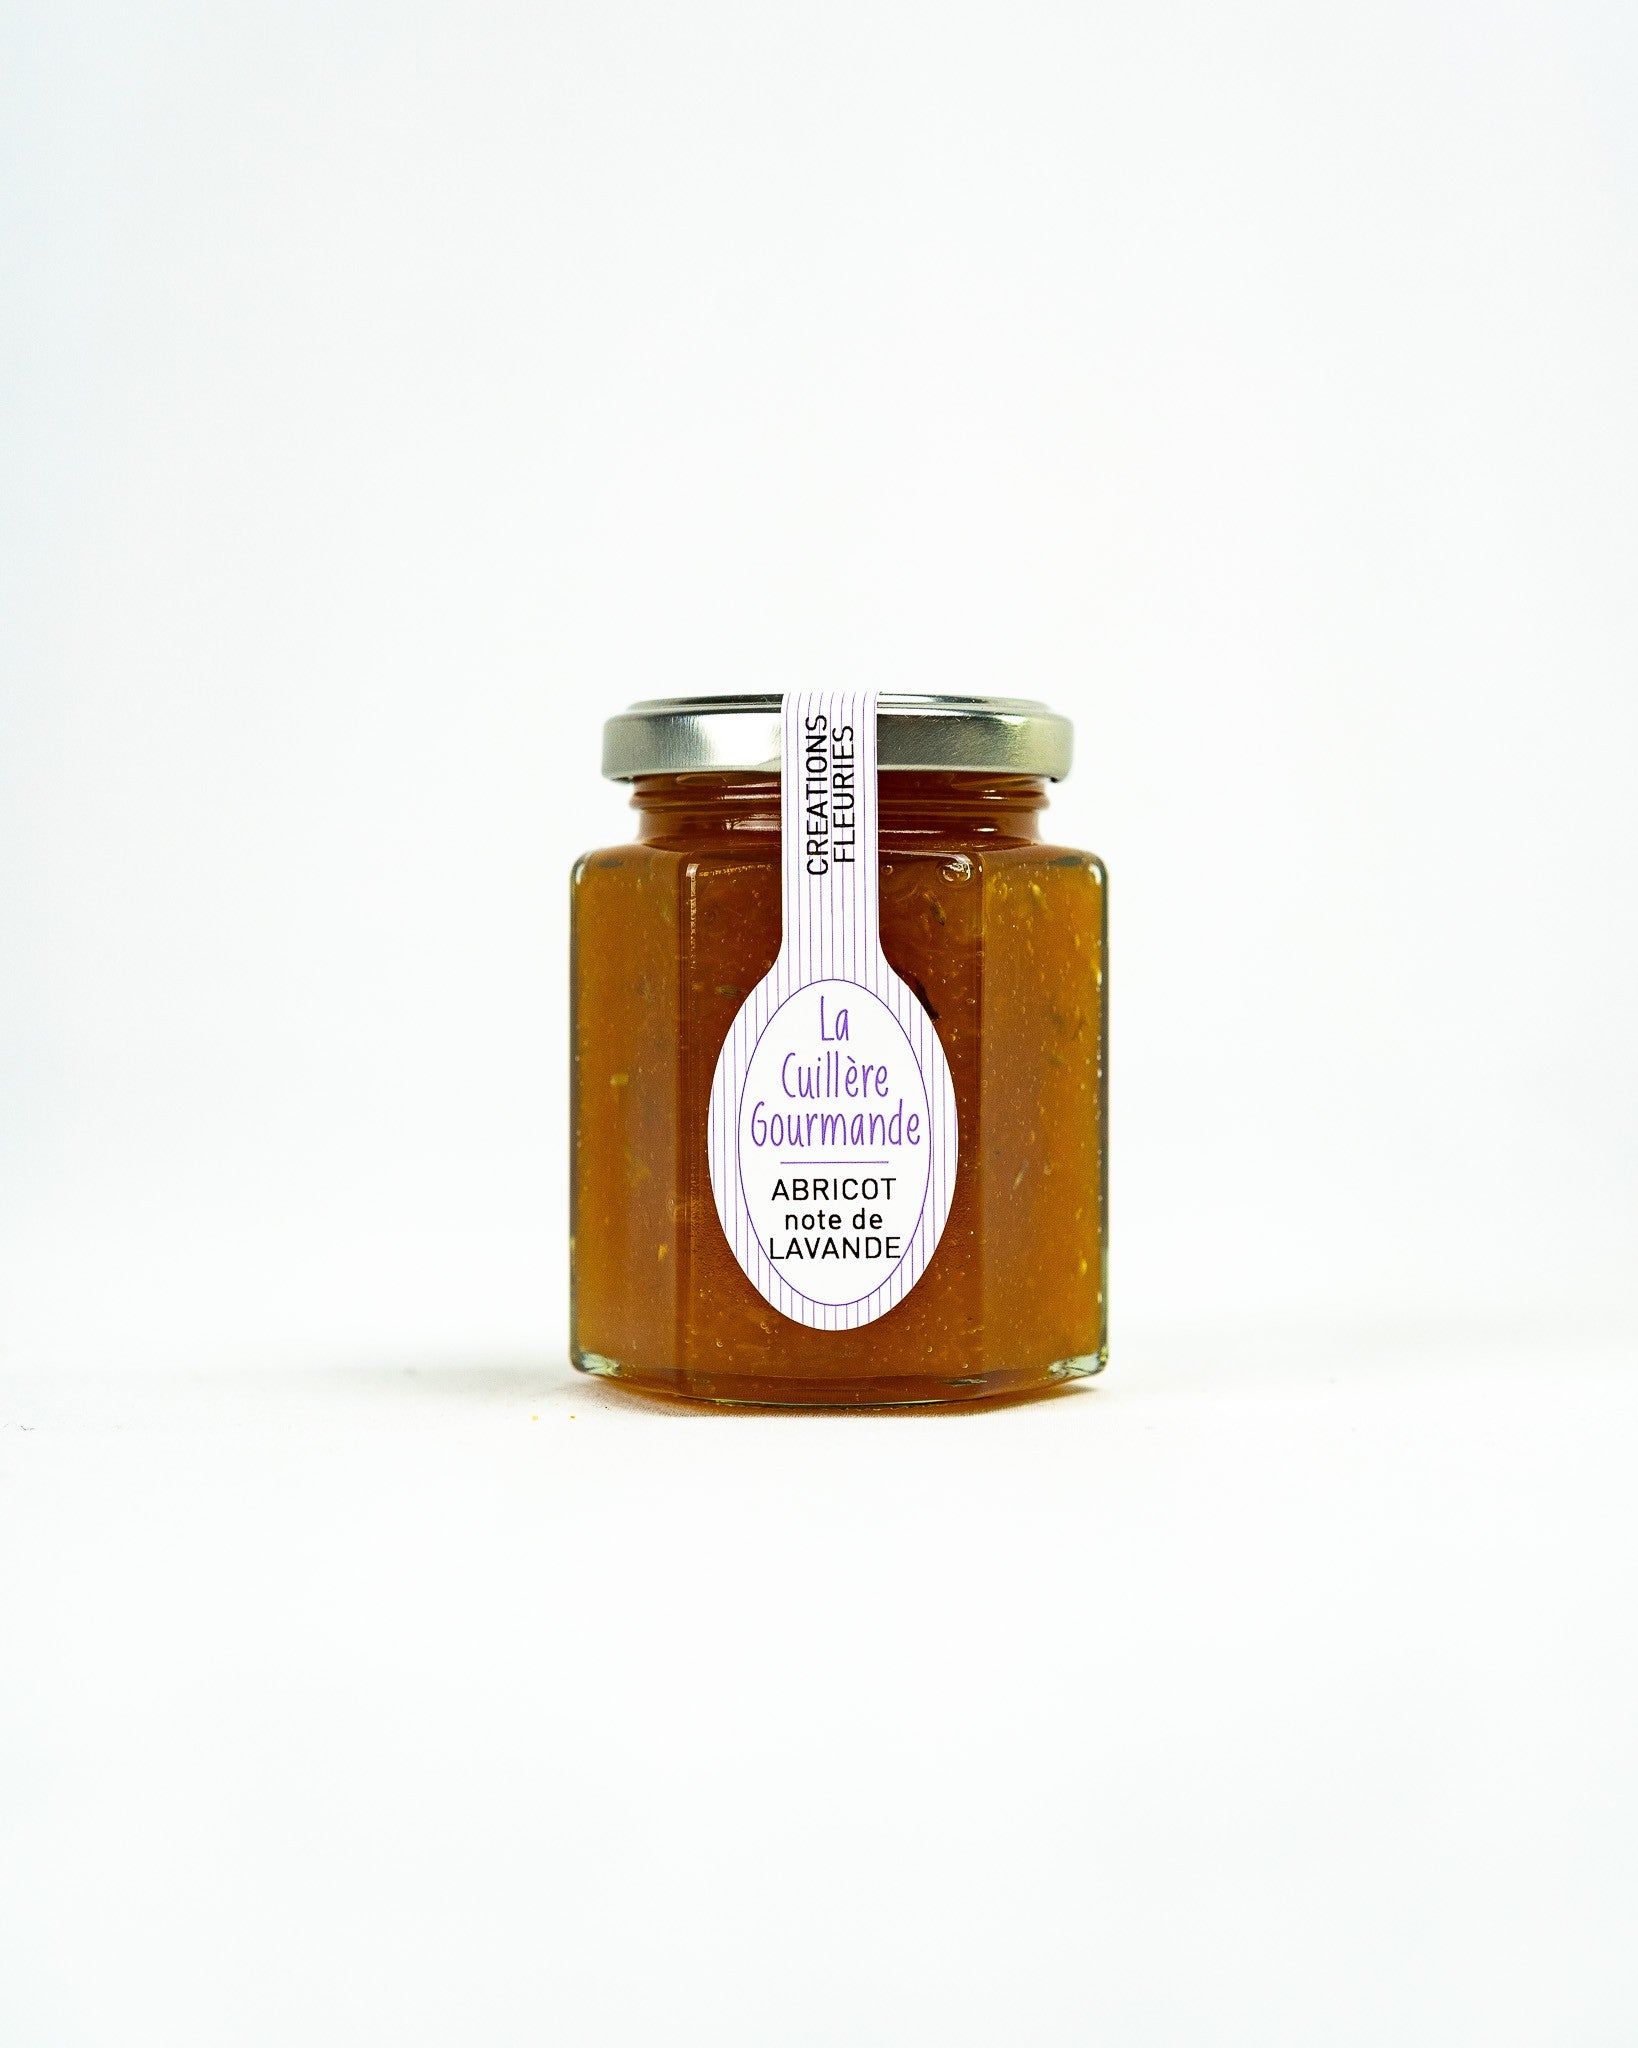 Apricot jam with lavender note